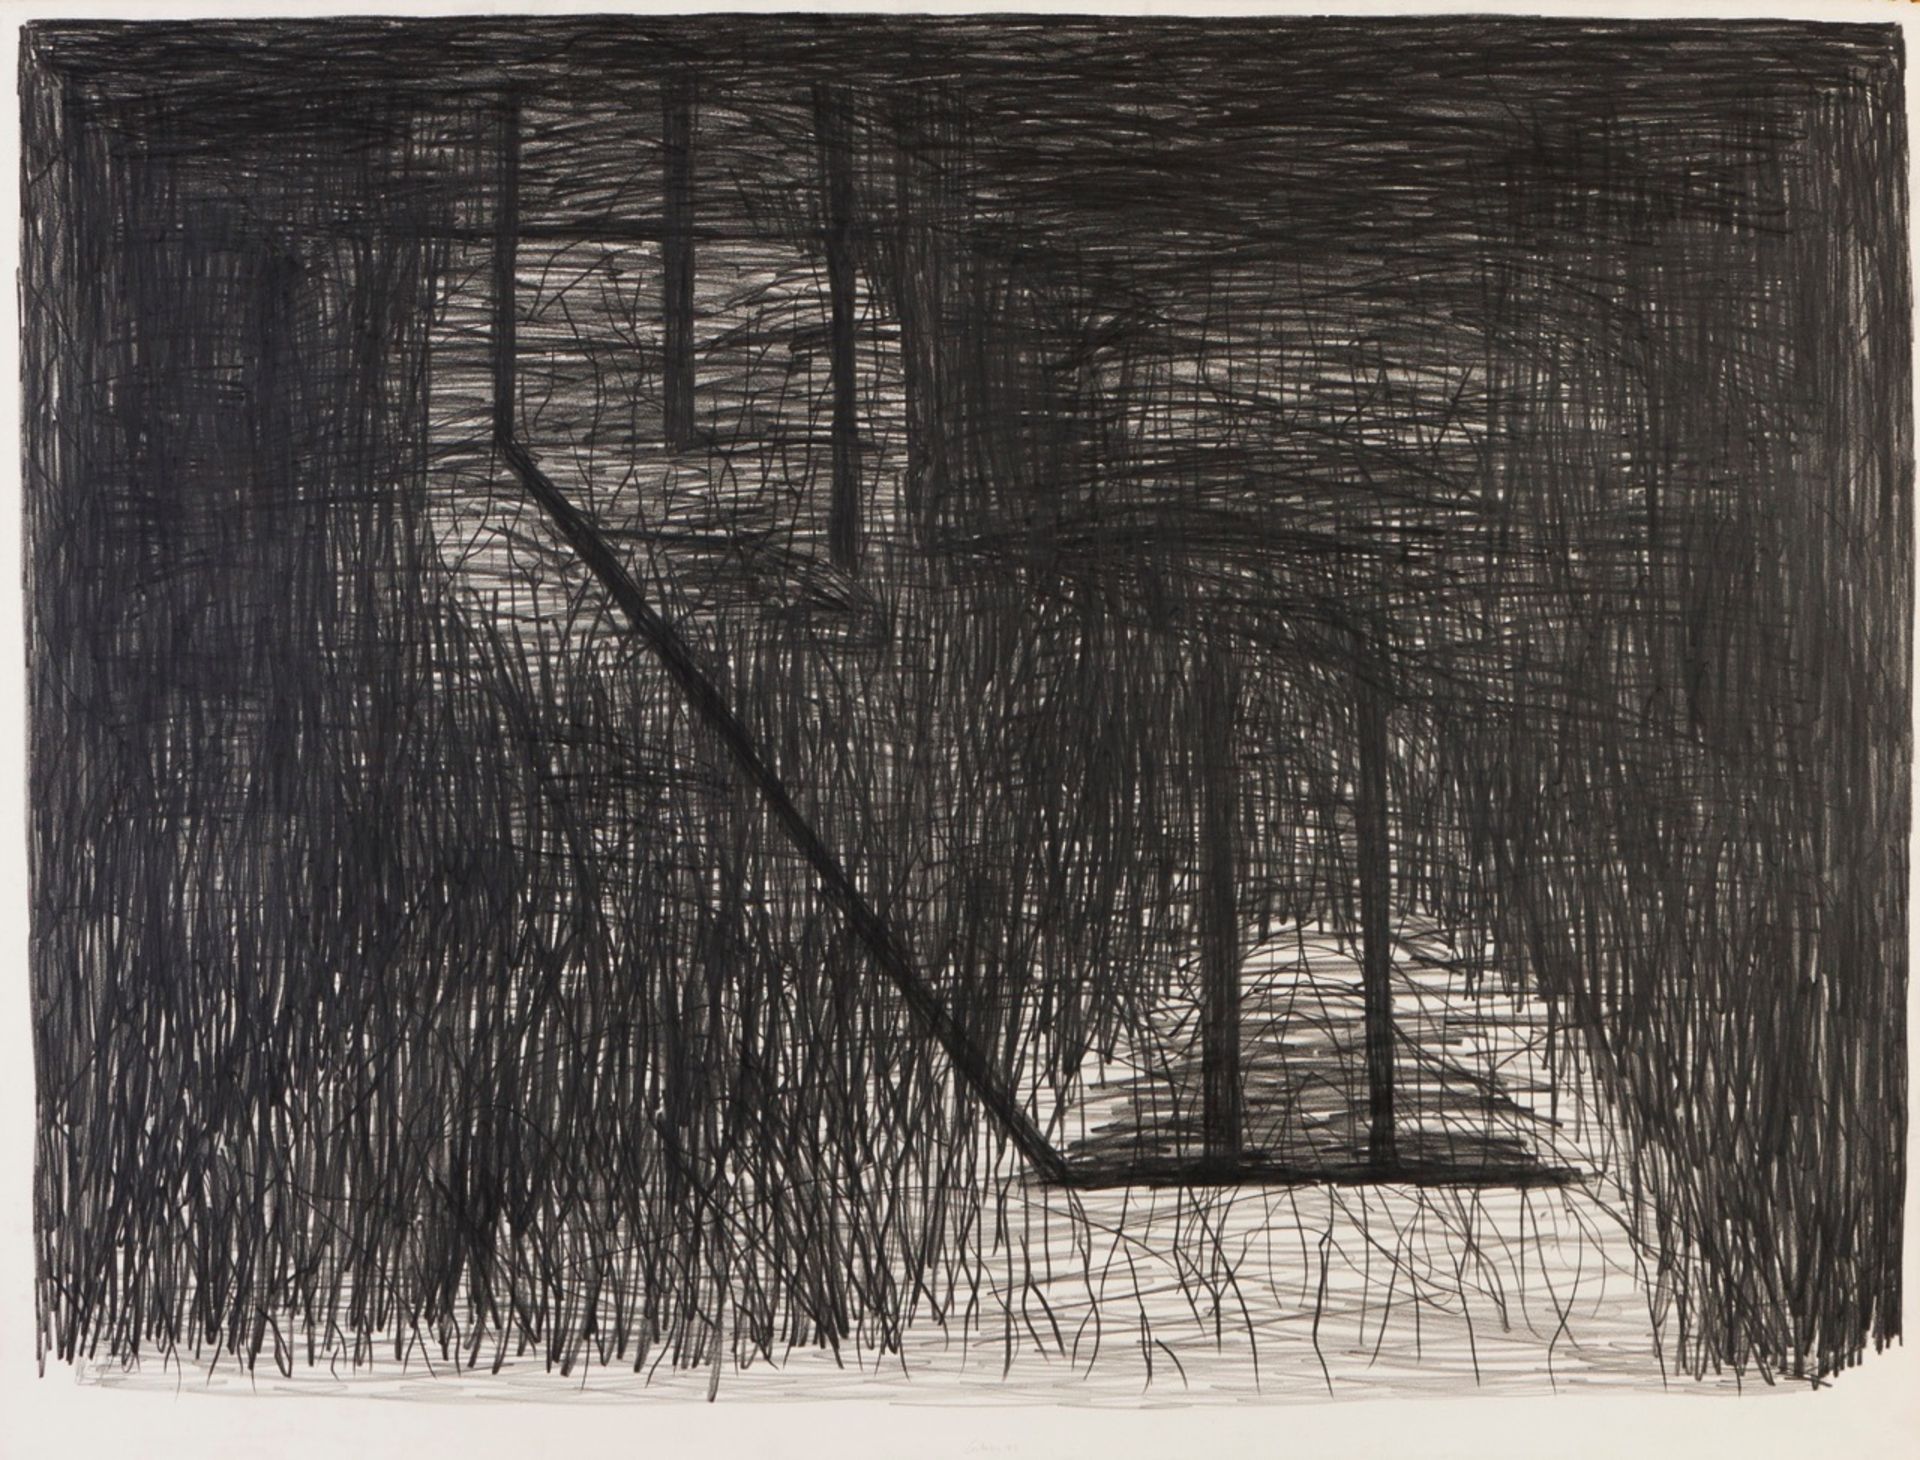 Pedro Calapez (b.1953)
"Teodora" from "Cidades" series
Graphite on paper
Signed and dated 1993